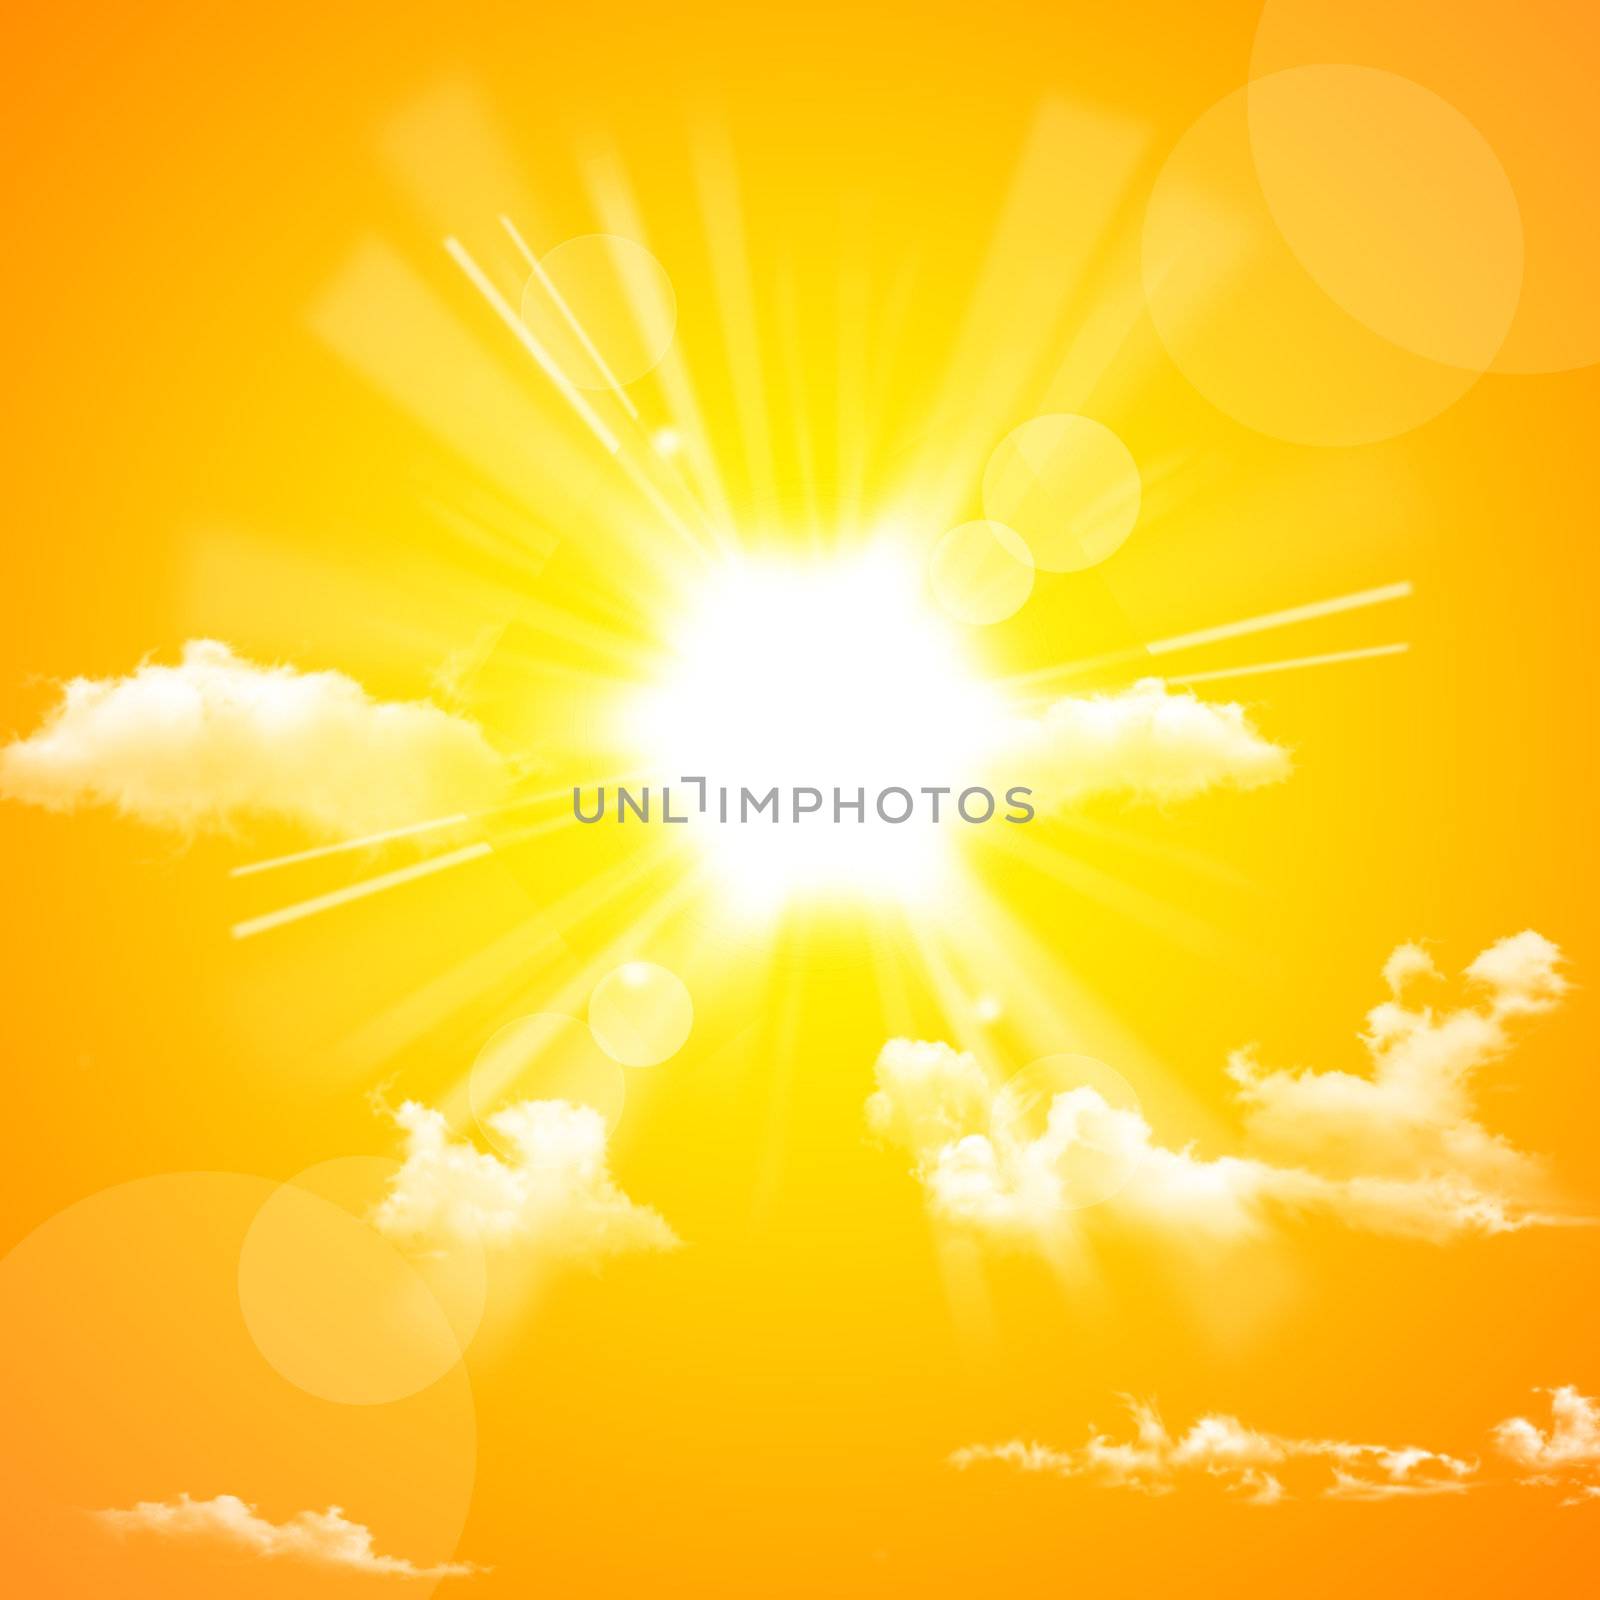 The bright yellow sun and cloud in the yellow sky
